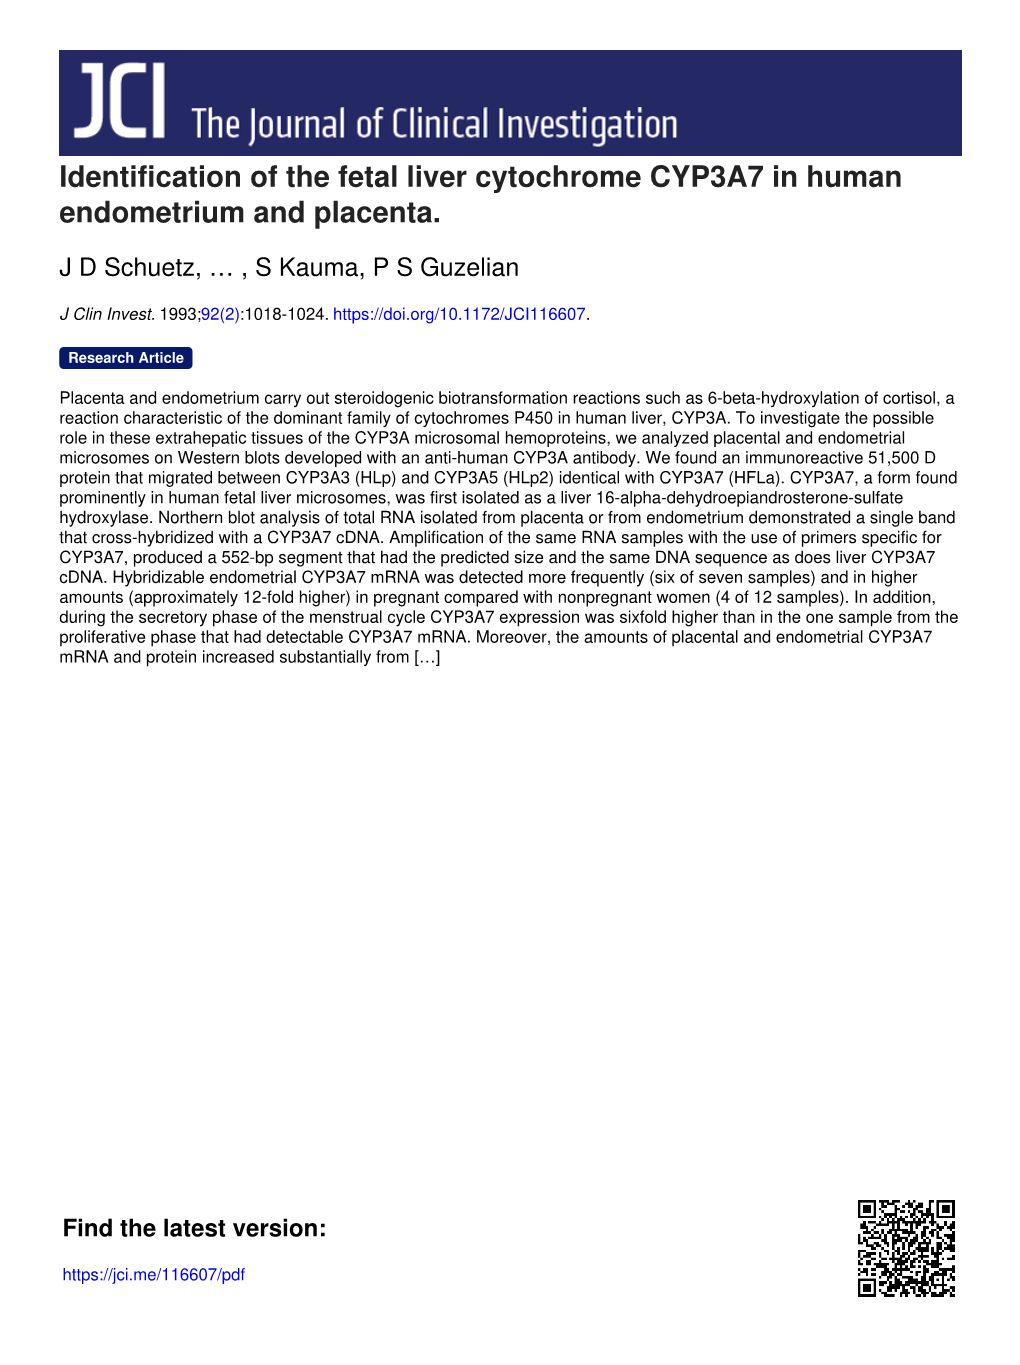 Identification of the Fetal Liver Cytochrome CYP3A7 in Human Endometrium and Placenta